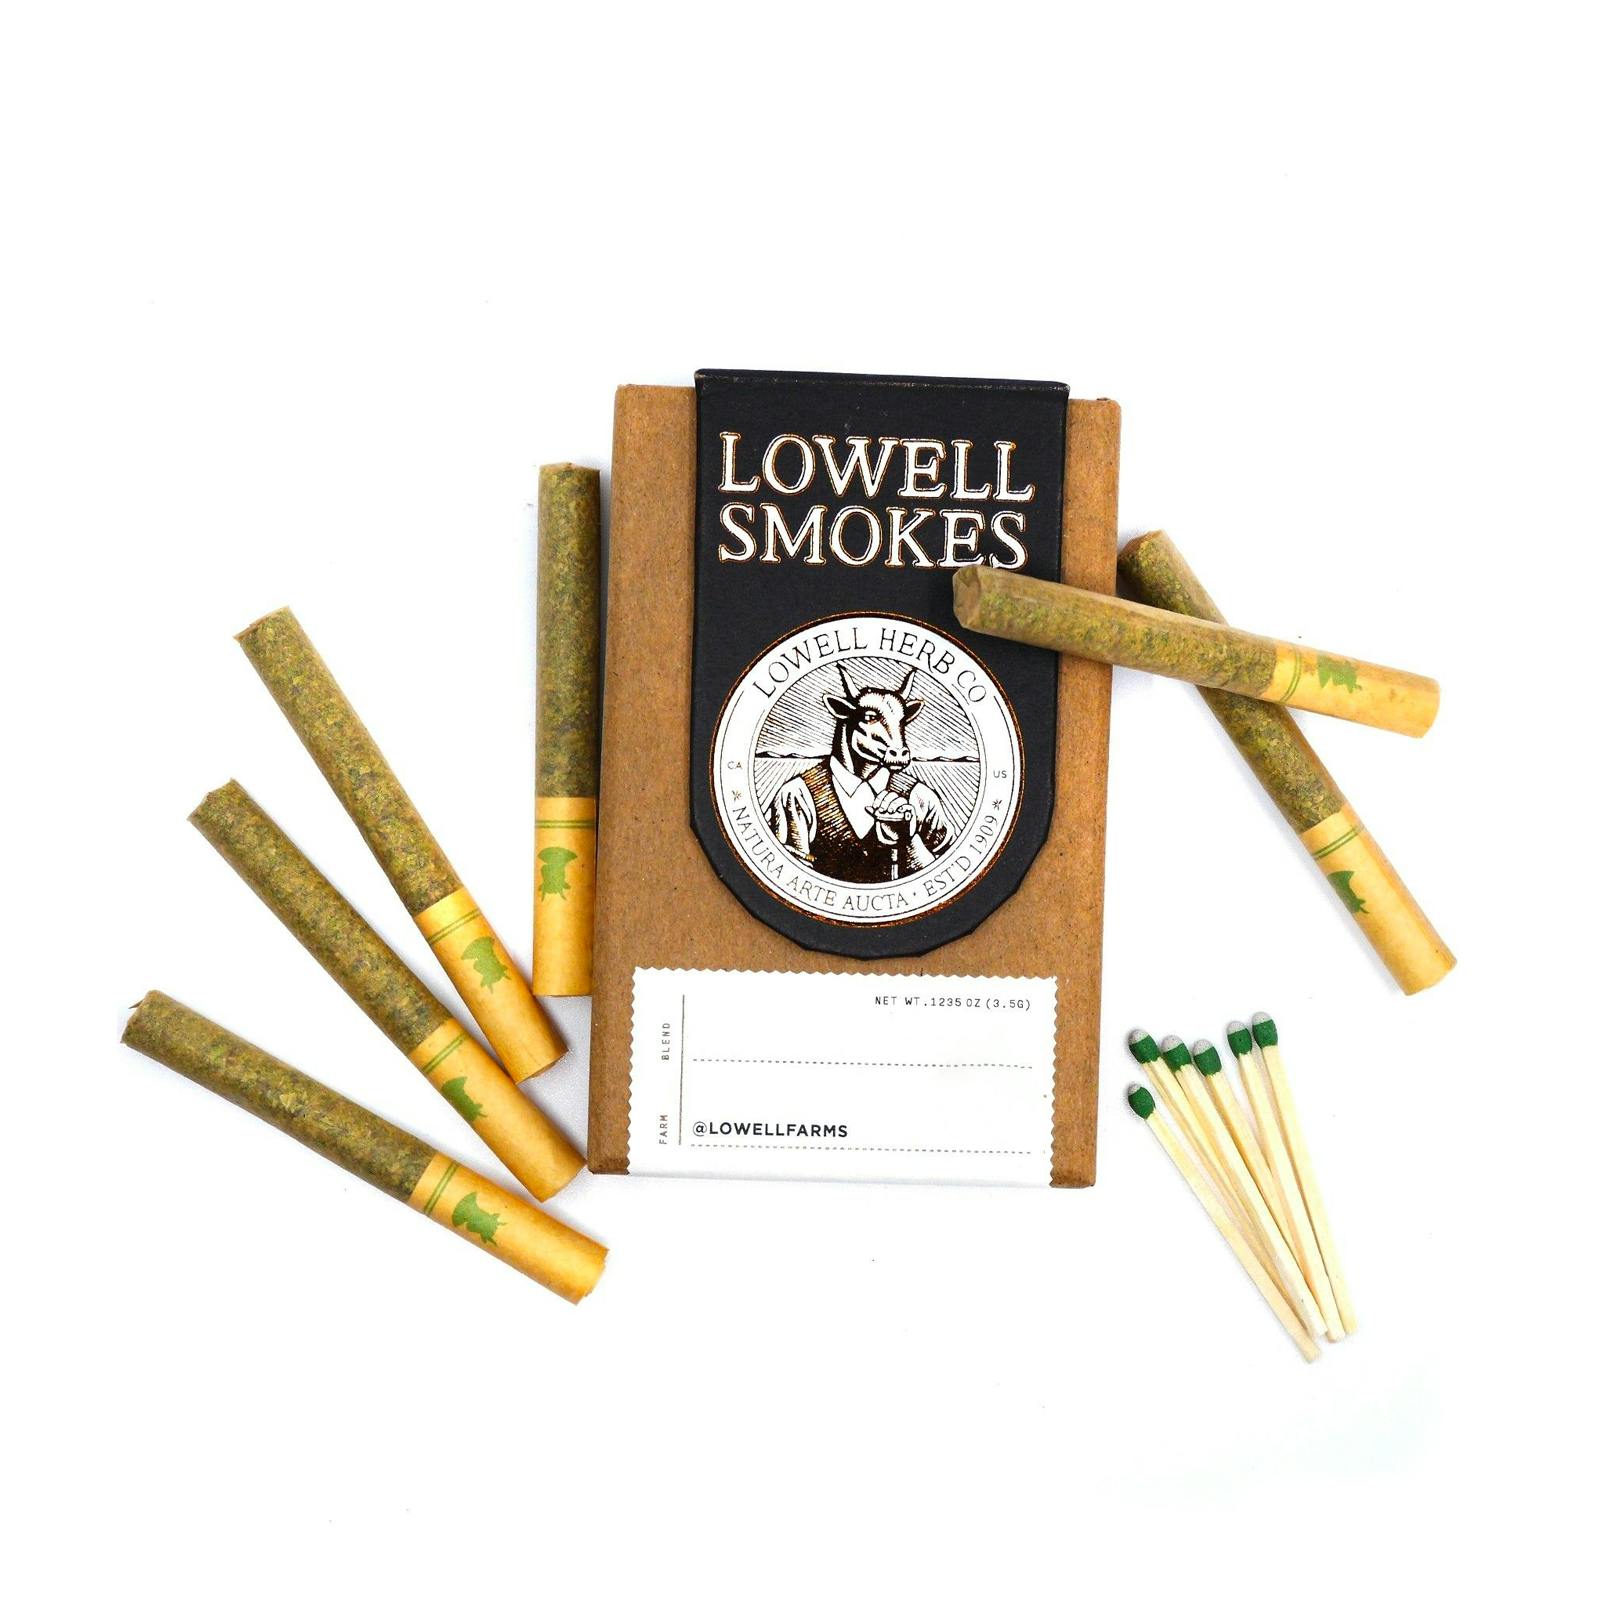 The Chill Lowell Smokes 6 pack